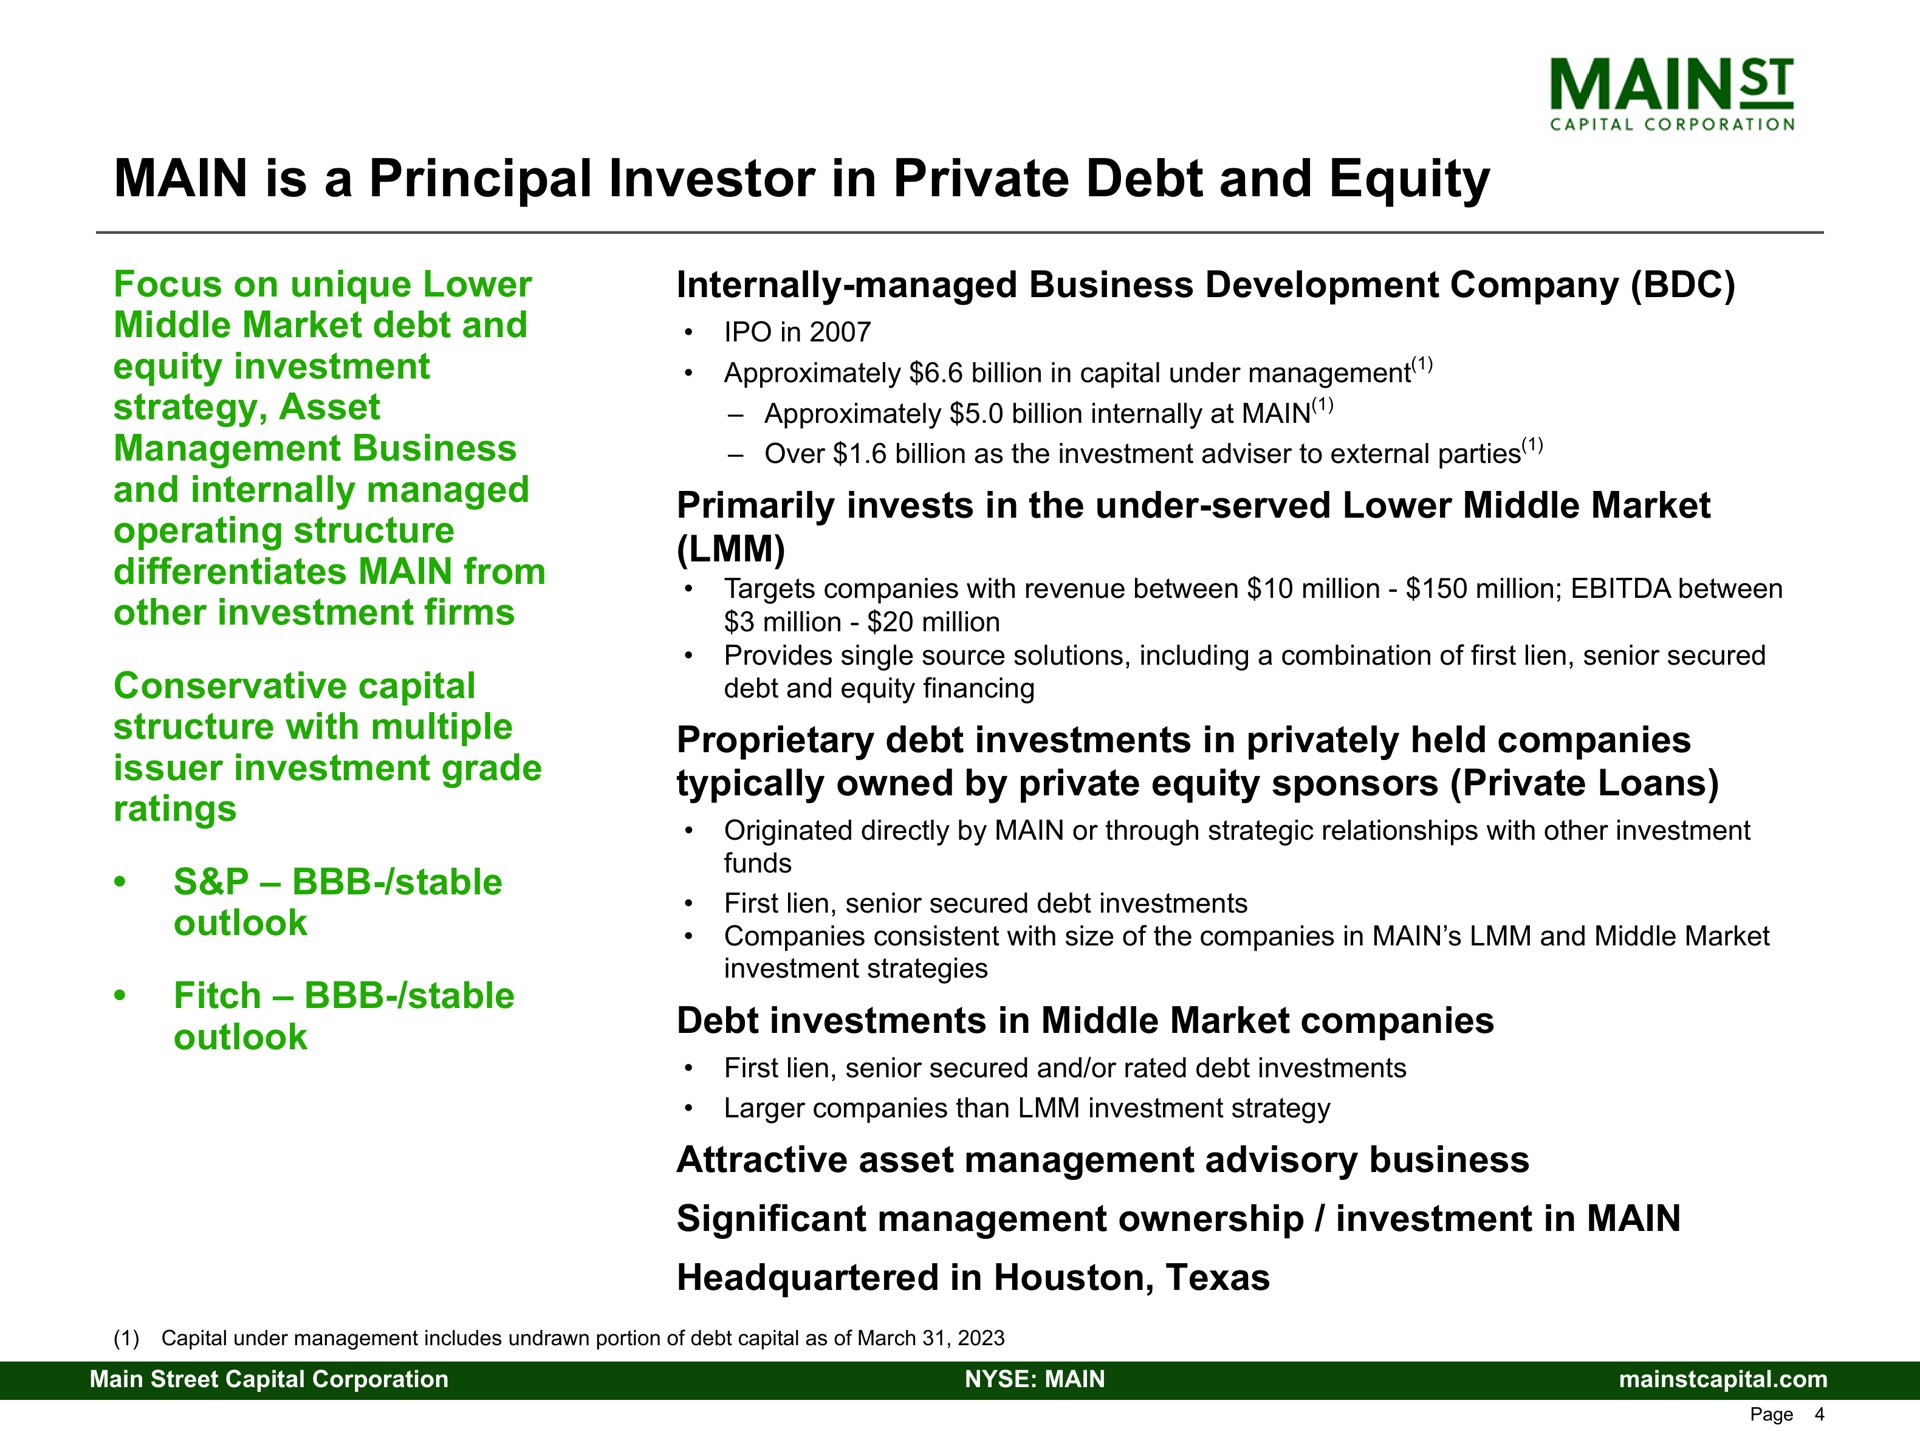 main is a principal investor in private debt and equity focus on unique lower middle market debt and equity investment strategy asset management business and internally managed operating structure differentiates main from other investment firms conservative capital structure with multiple issuer investment grade ratings stable outlook fitch stable outlook internally managed business development company primarily invests in the under served lower middle market proprietary debt investments in privately held companies typically owned by private equity sponsors private loans debt investments in middle market companies attractive asset management advisory business significant management ownership investment in main headquartered in | Main Street Capital